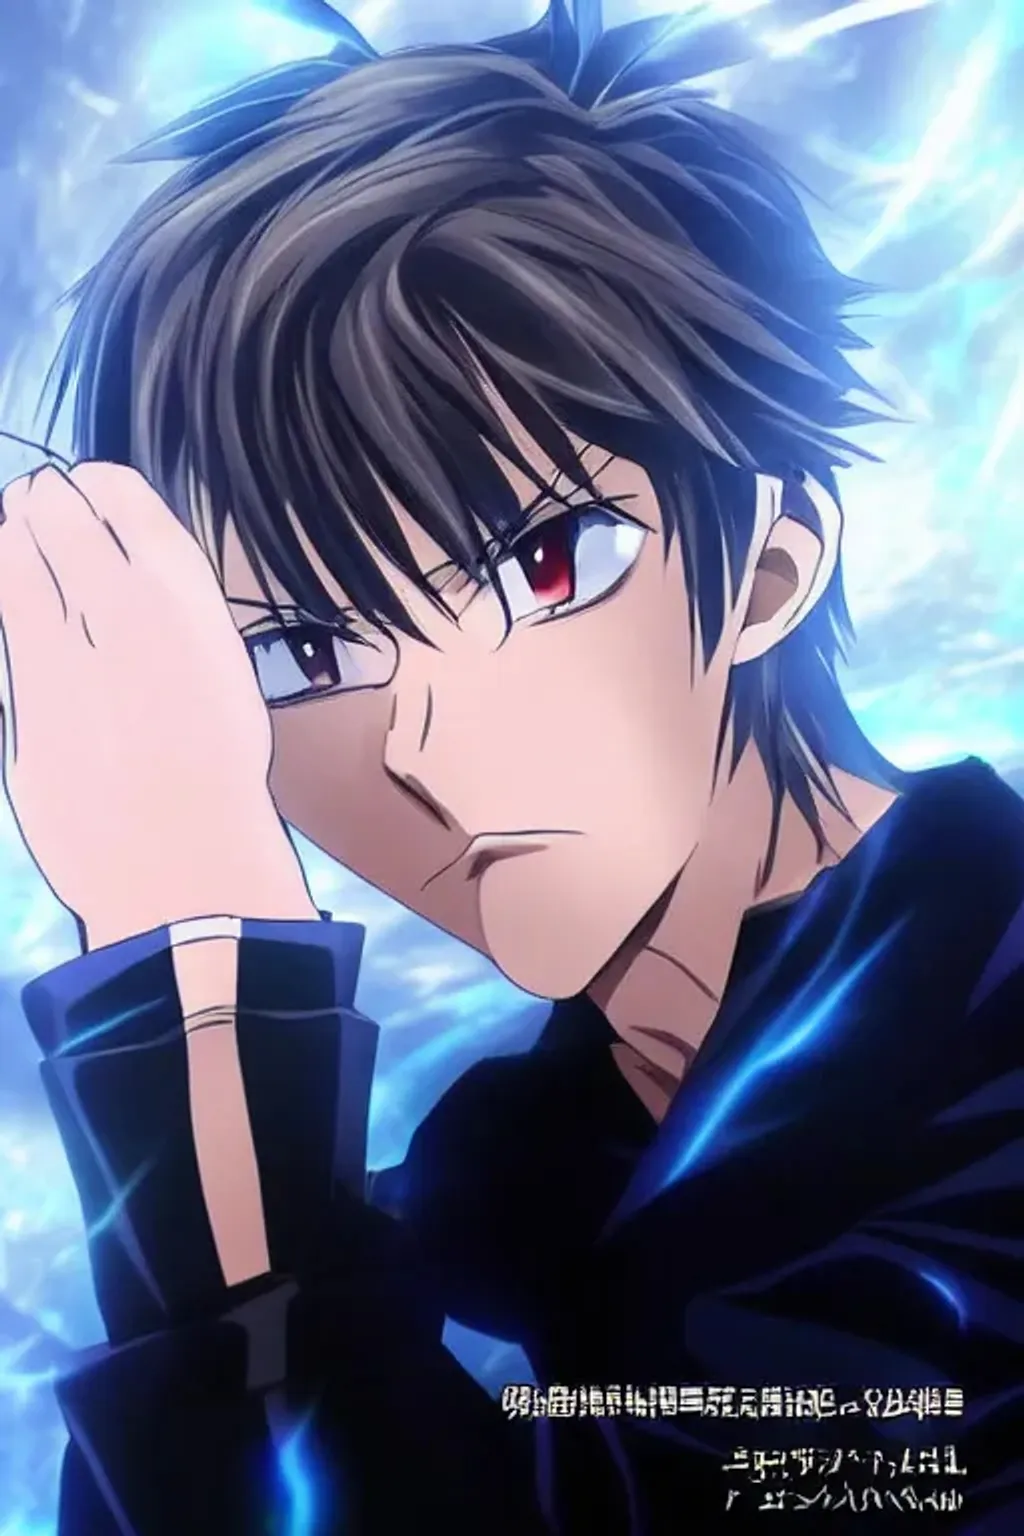 Male anime character in High School DxD, kazuma anime characters -  thirstymag.com